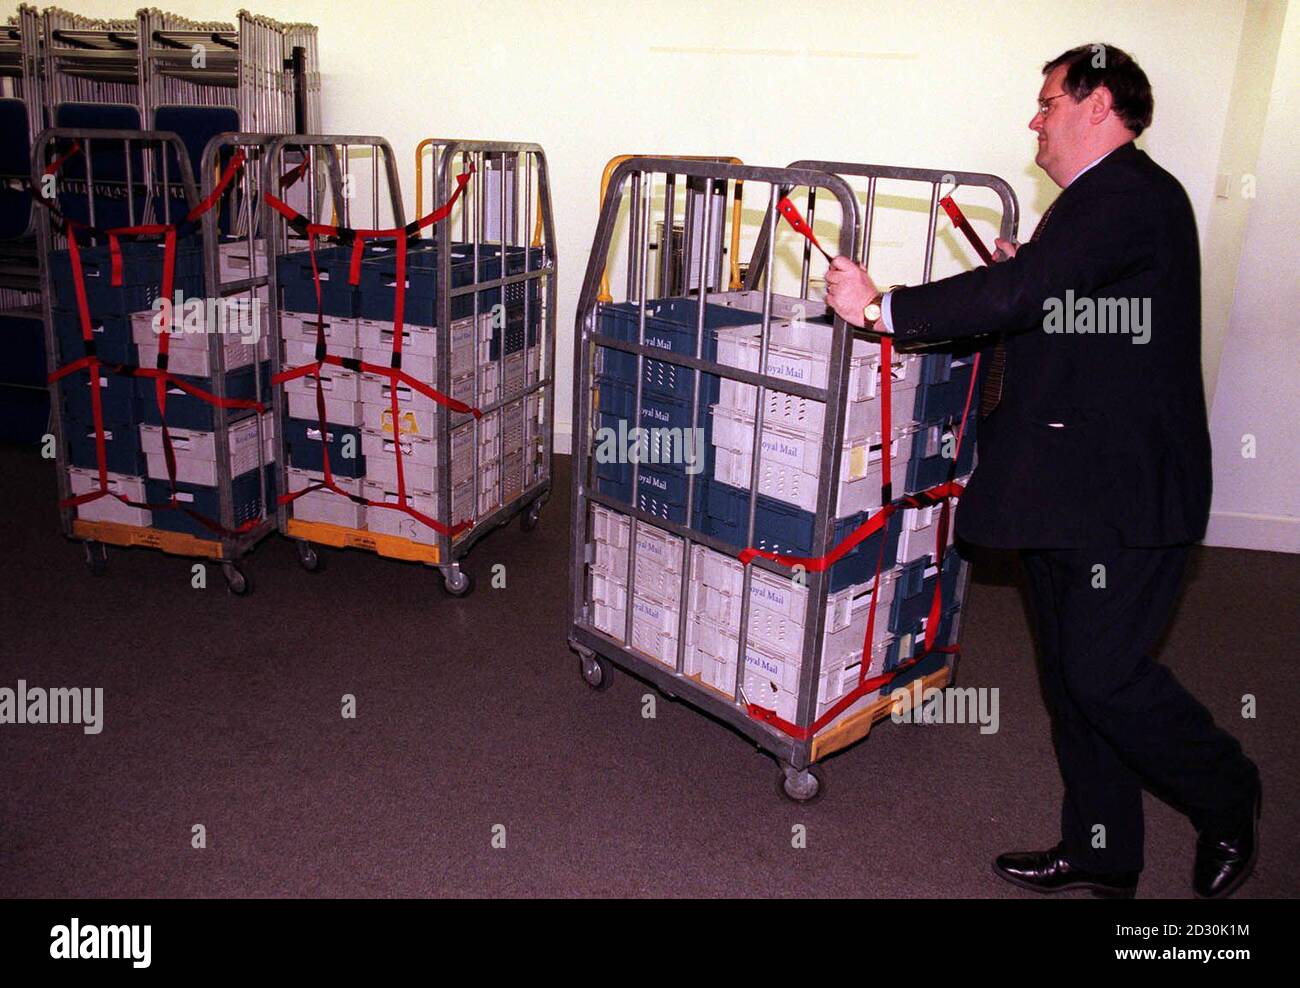 Returned ballot papers arriving at the Conservative Central Office, on the day when former minister Steve Norris is due to learn whether he had beaten businessman Andrew Boff to become Tory candidate for mayor of London.  Stock Photo